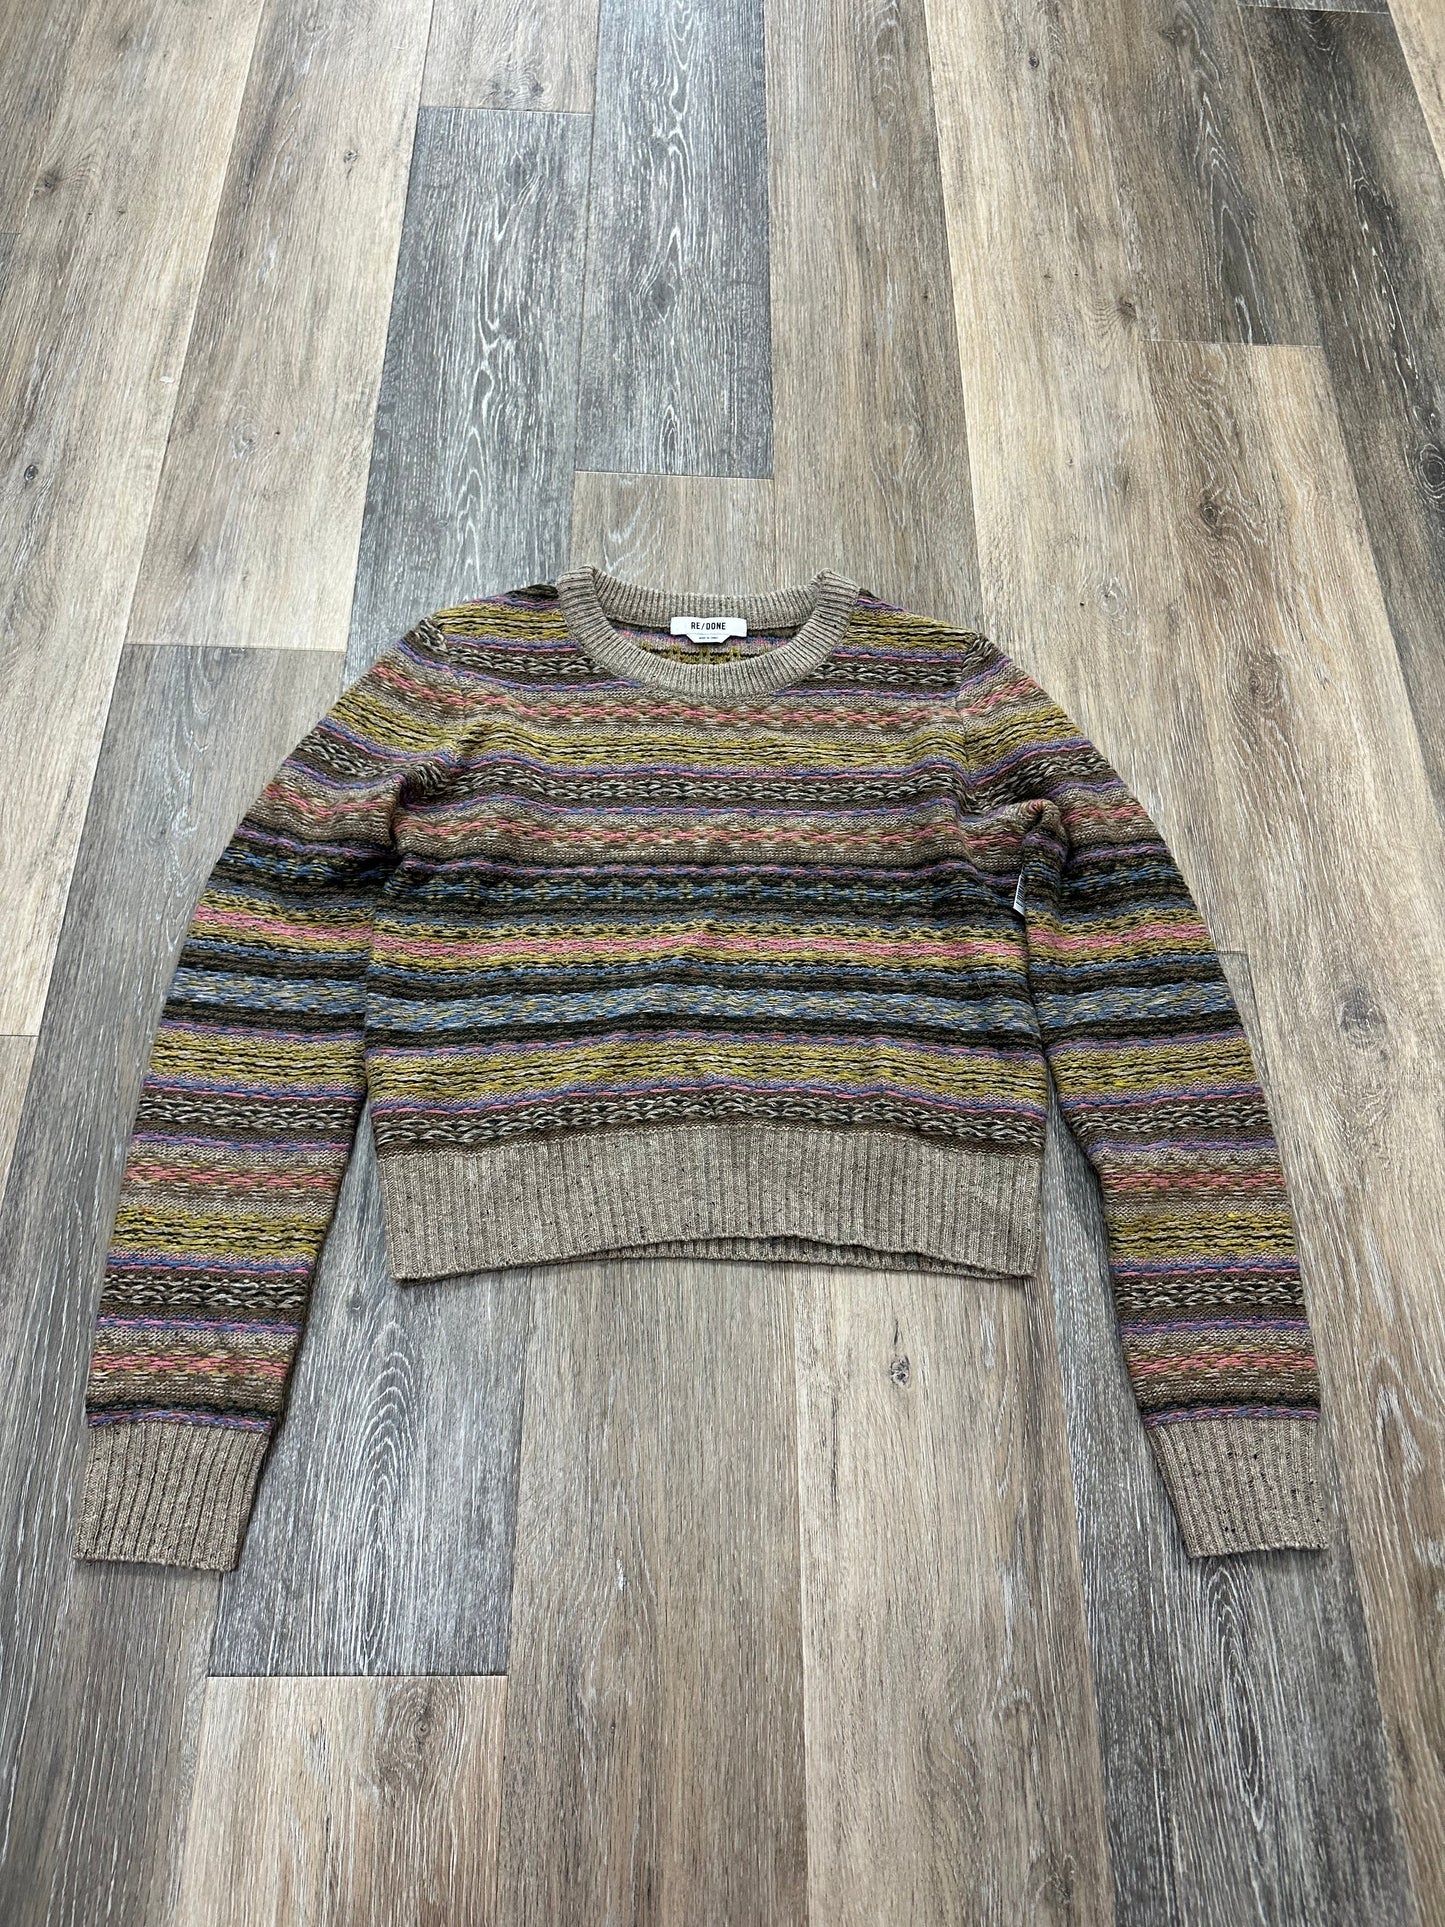 Grey Sweater Designer Re/Done, Size S